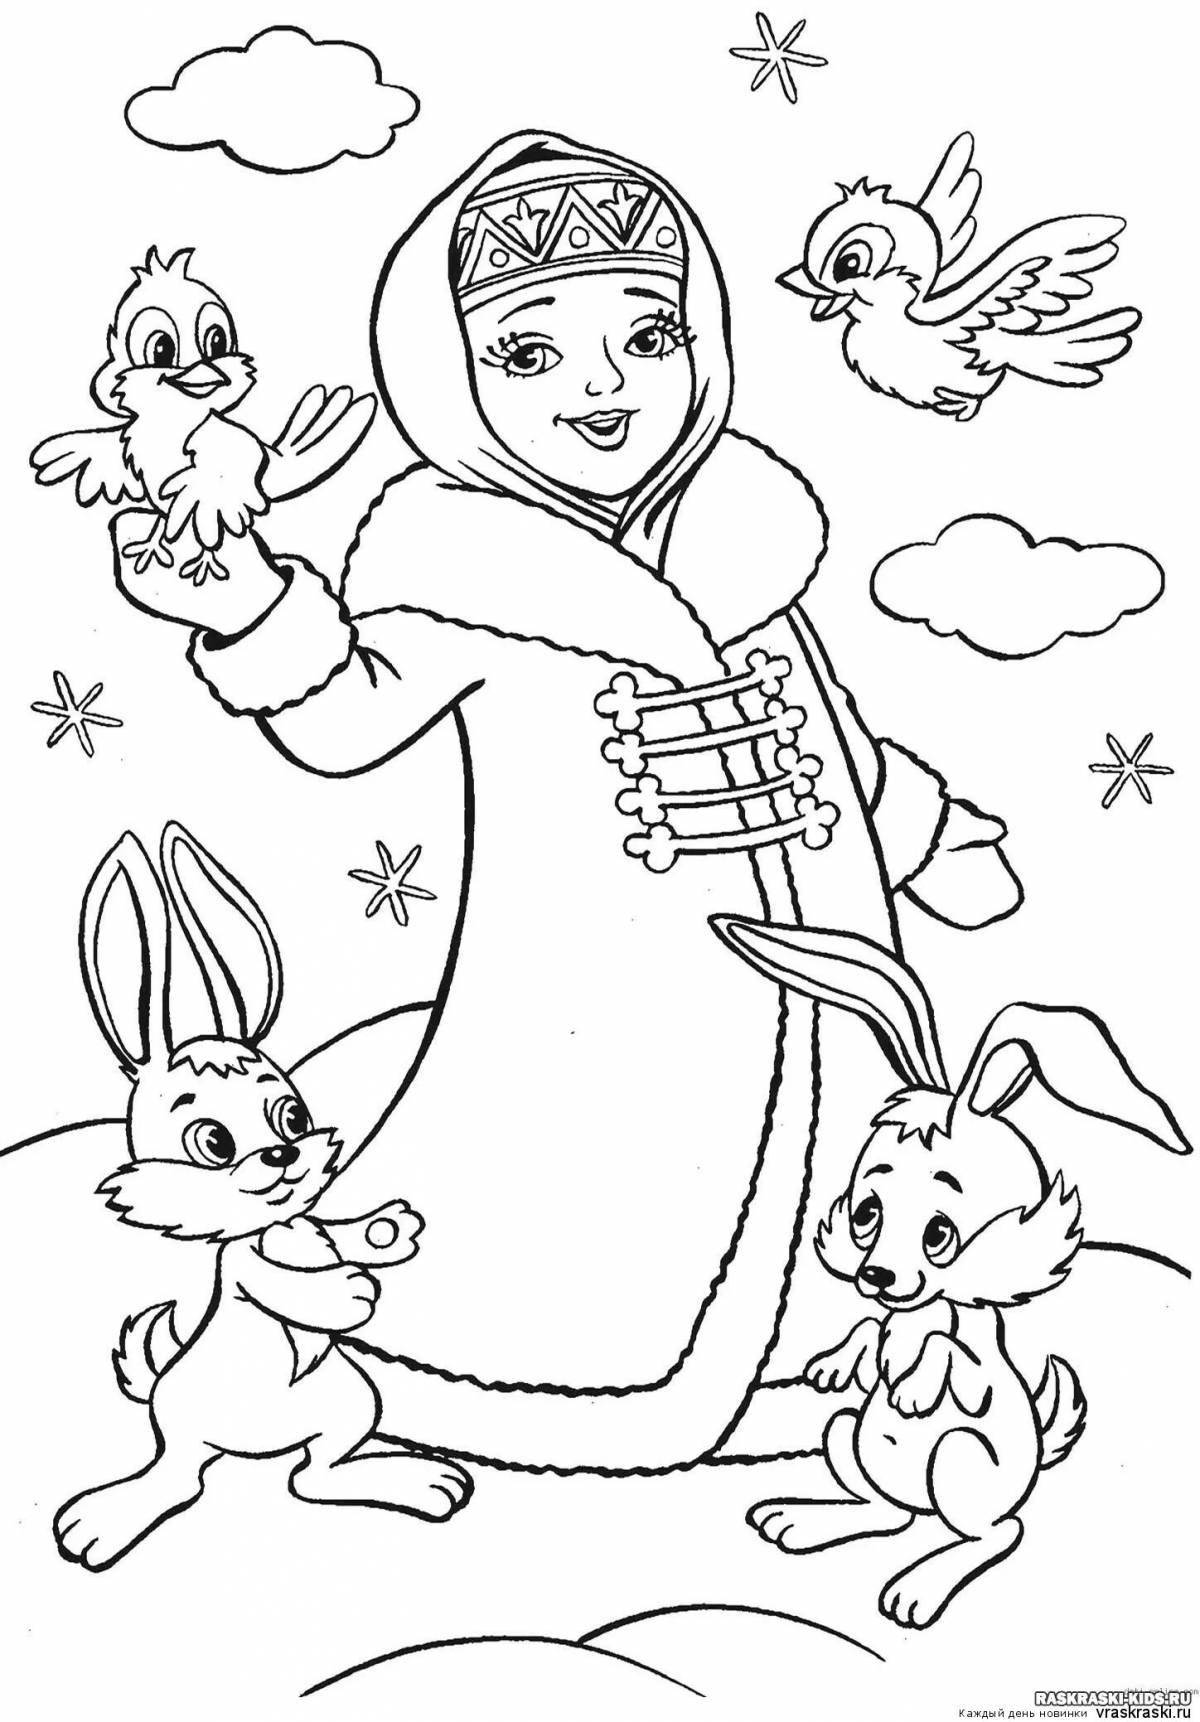 Amazing winter fairy tale coloring book